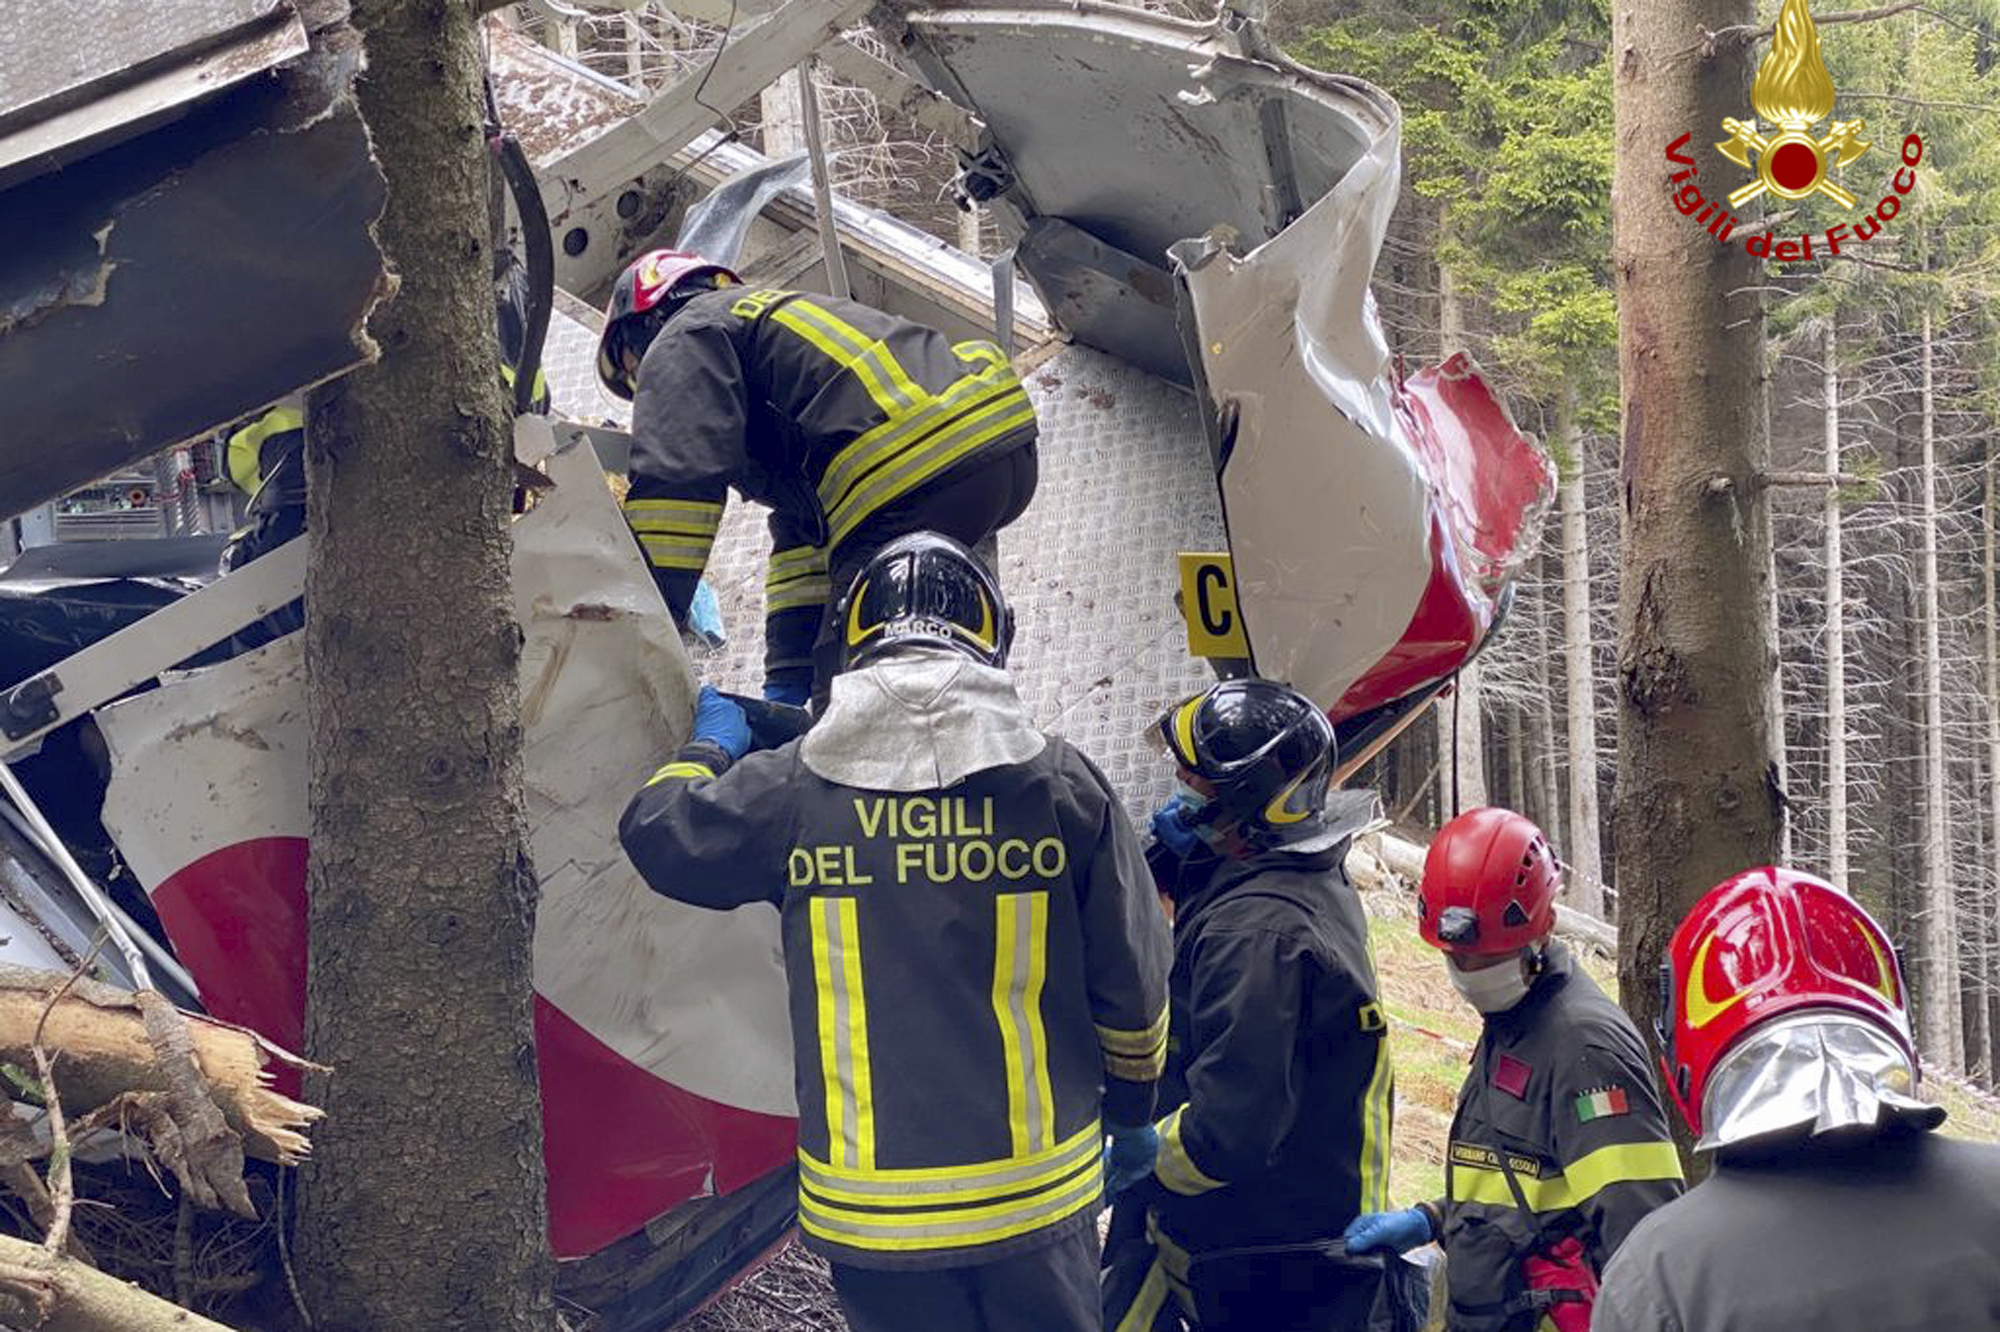 Rescuers work by the wreckage of a cable car after it collapsed near the summit of the Stresa-Mottarone line in the Piedmont region, northern Italy, Sunday, May 23, 2021. Italy’s transport minister was heading Monday, May 24, 2021 to the scene of a cable car disaster that killed 14 people when the lead cable apparently snapped and the cabin careened back down the mountain until it pulled off the line and crashed to the ground. (Vigili del Fuoco Firefighters via AP)